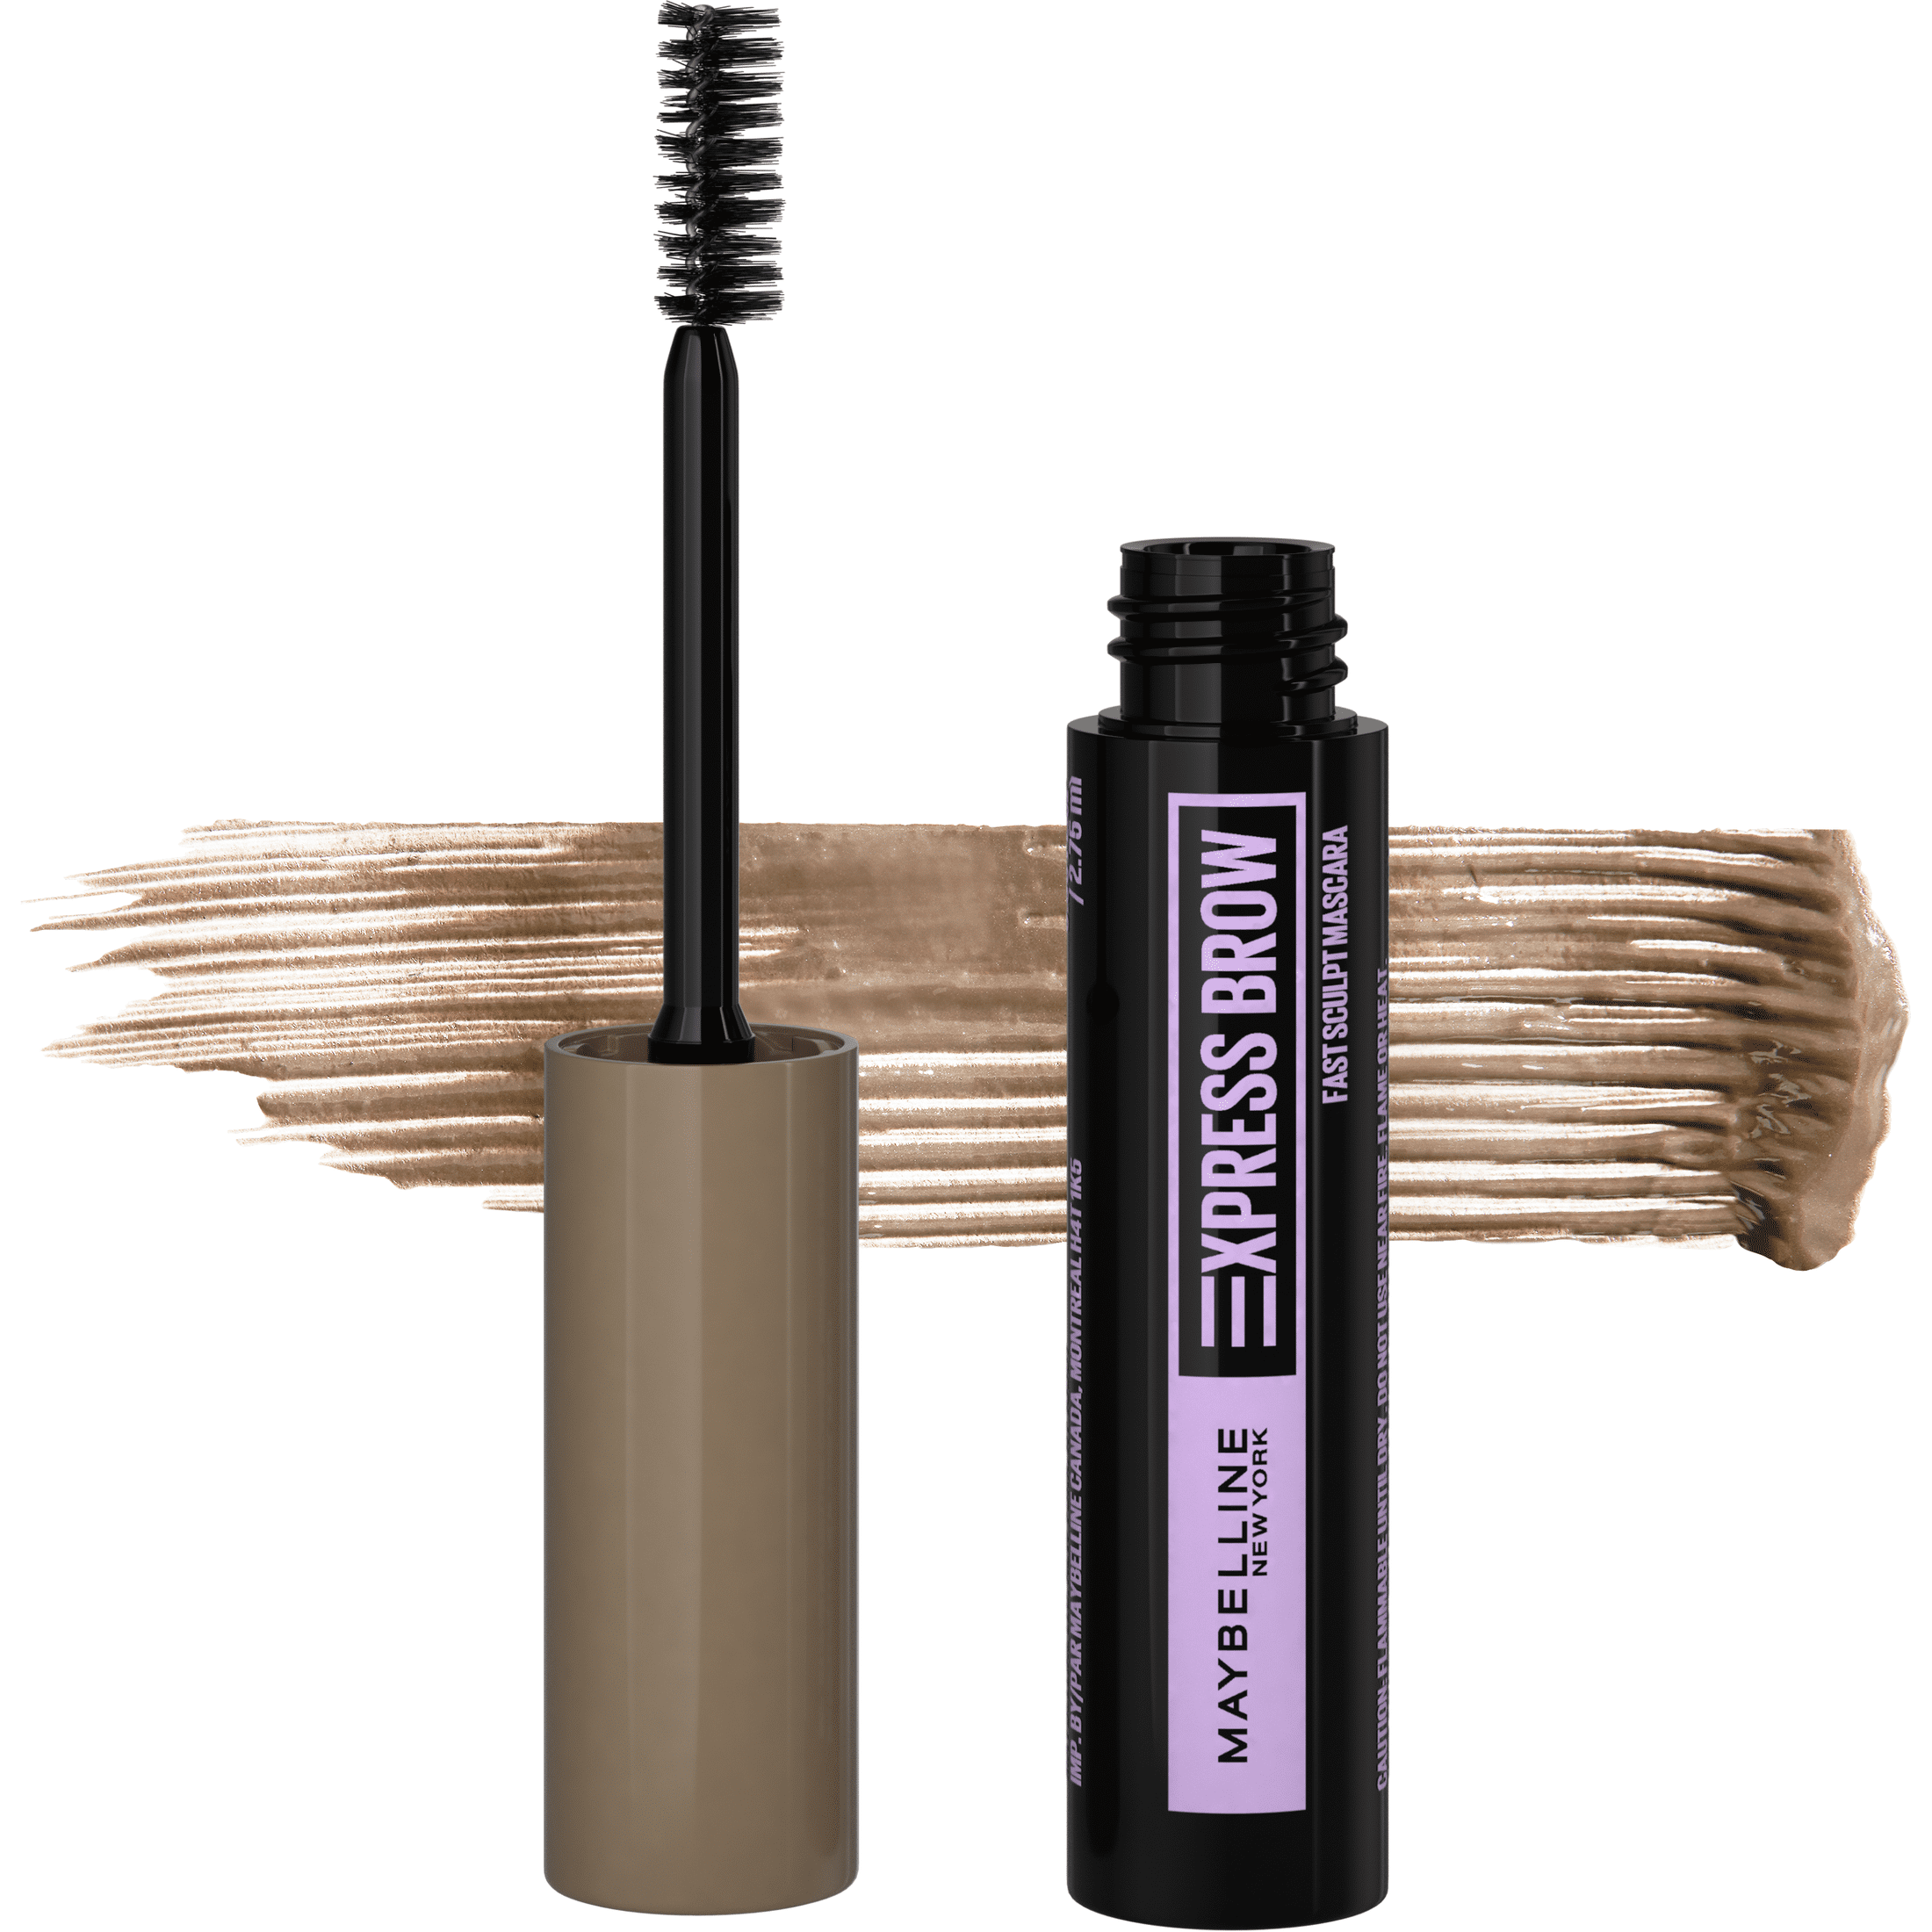 Maybelline Brow Drama Makeup